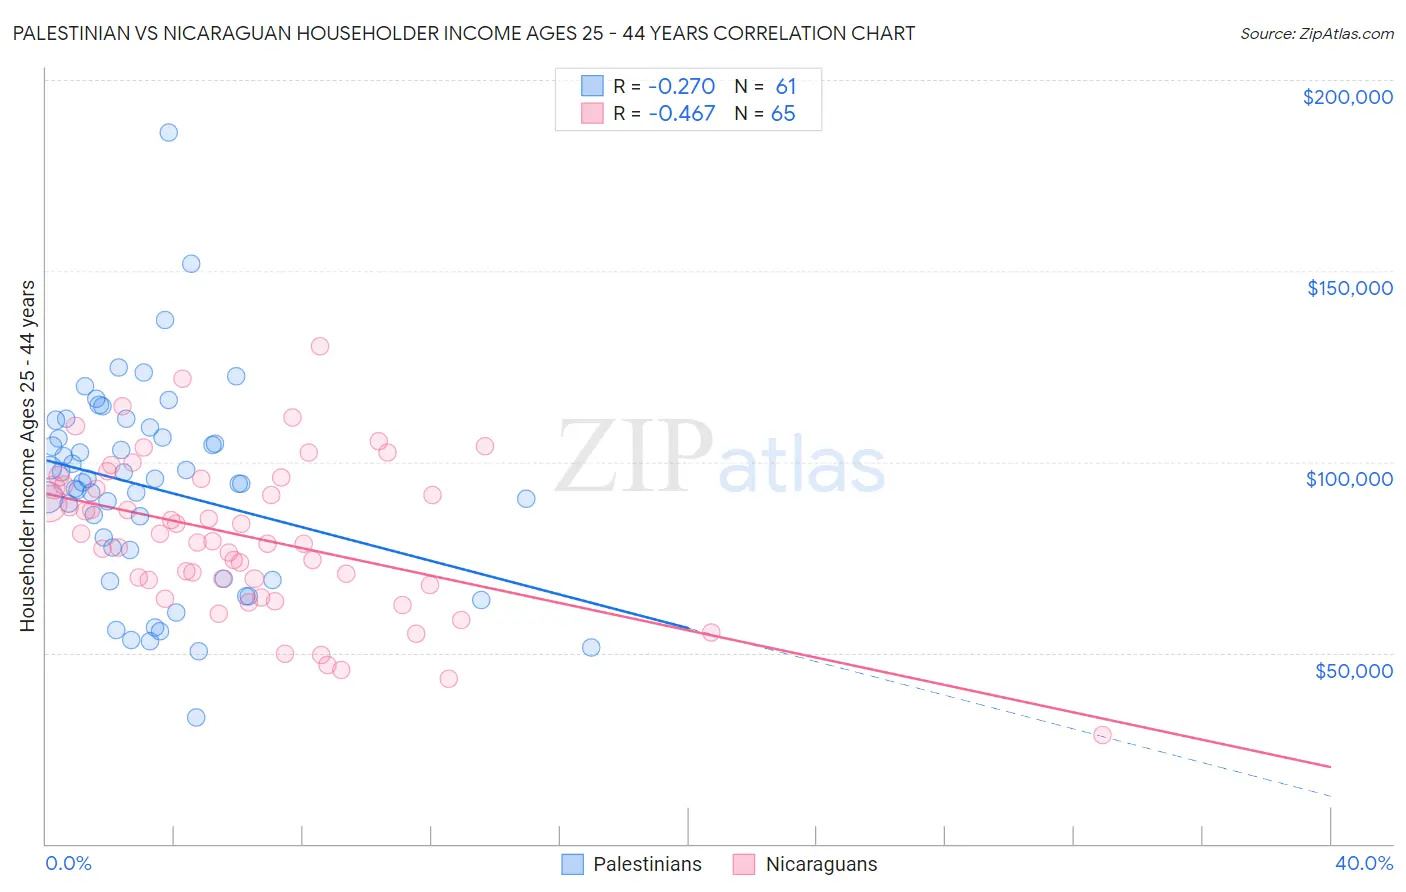 Palestinian vs Nicaraguan Householder Income Ages 25 - 44 years